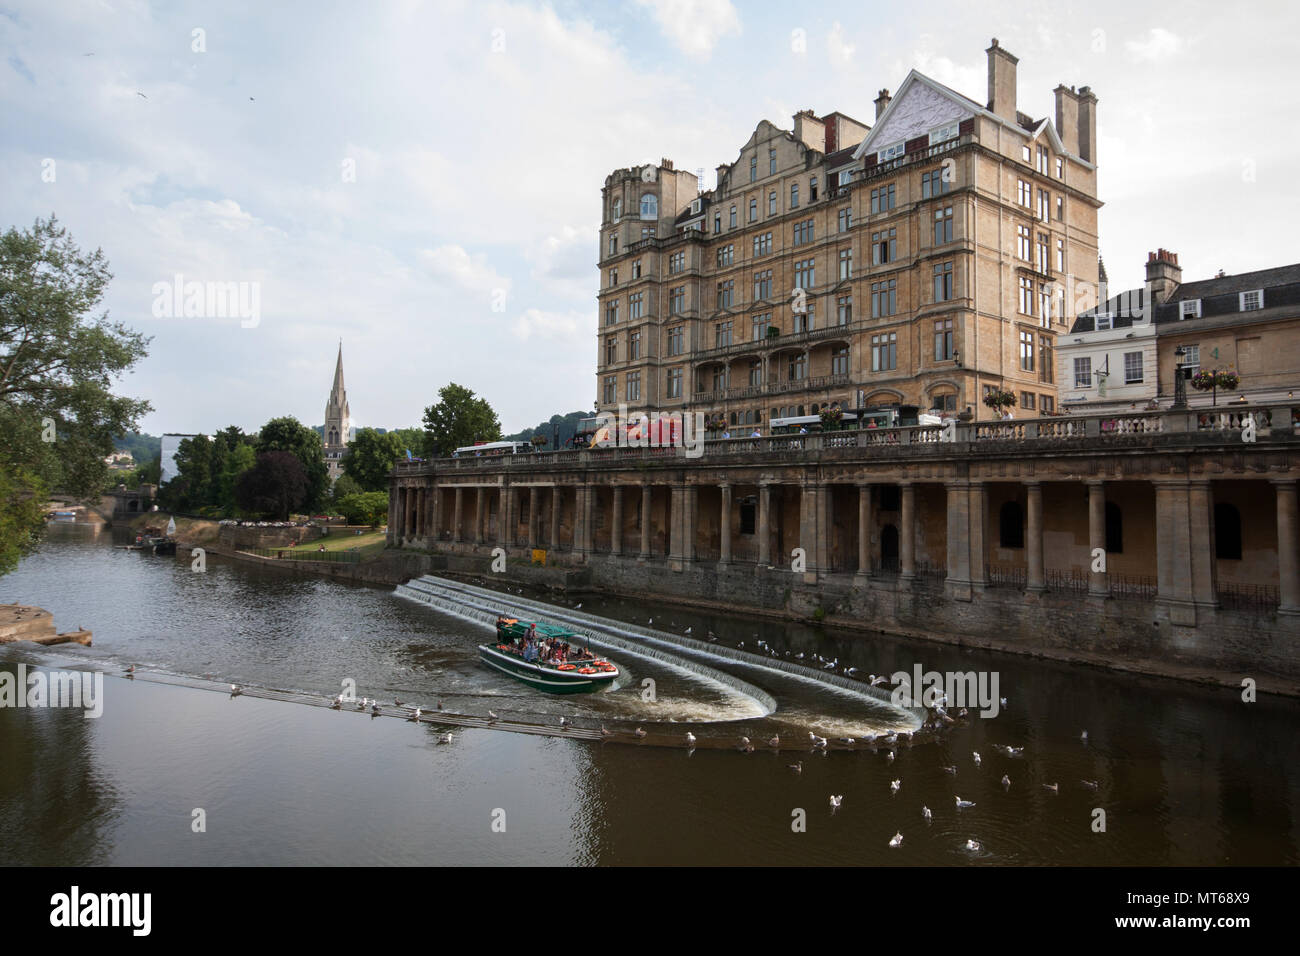 Pulteney Weir in river Avon, with Empire hotel in the background, in Bath, England, UK. Stock Photo